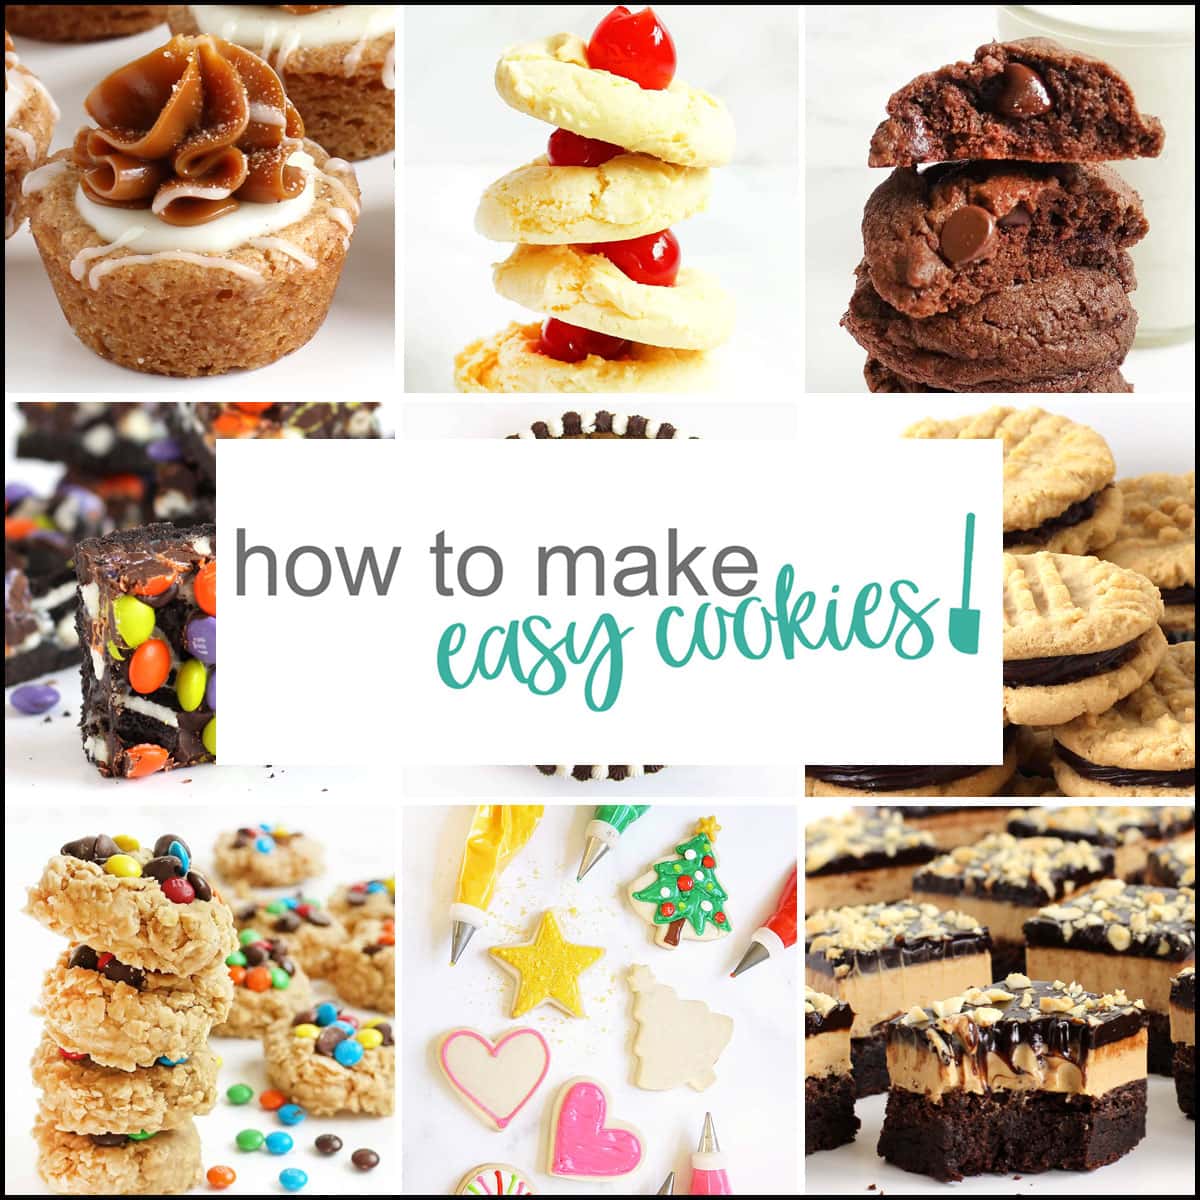 How To Make Easy Cookies collage of homemade cookies